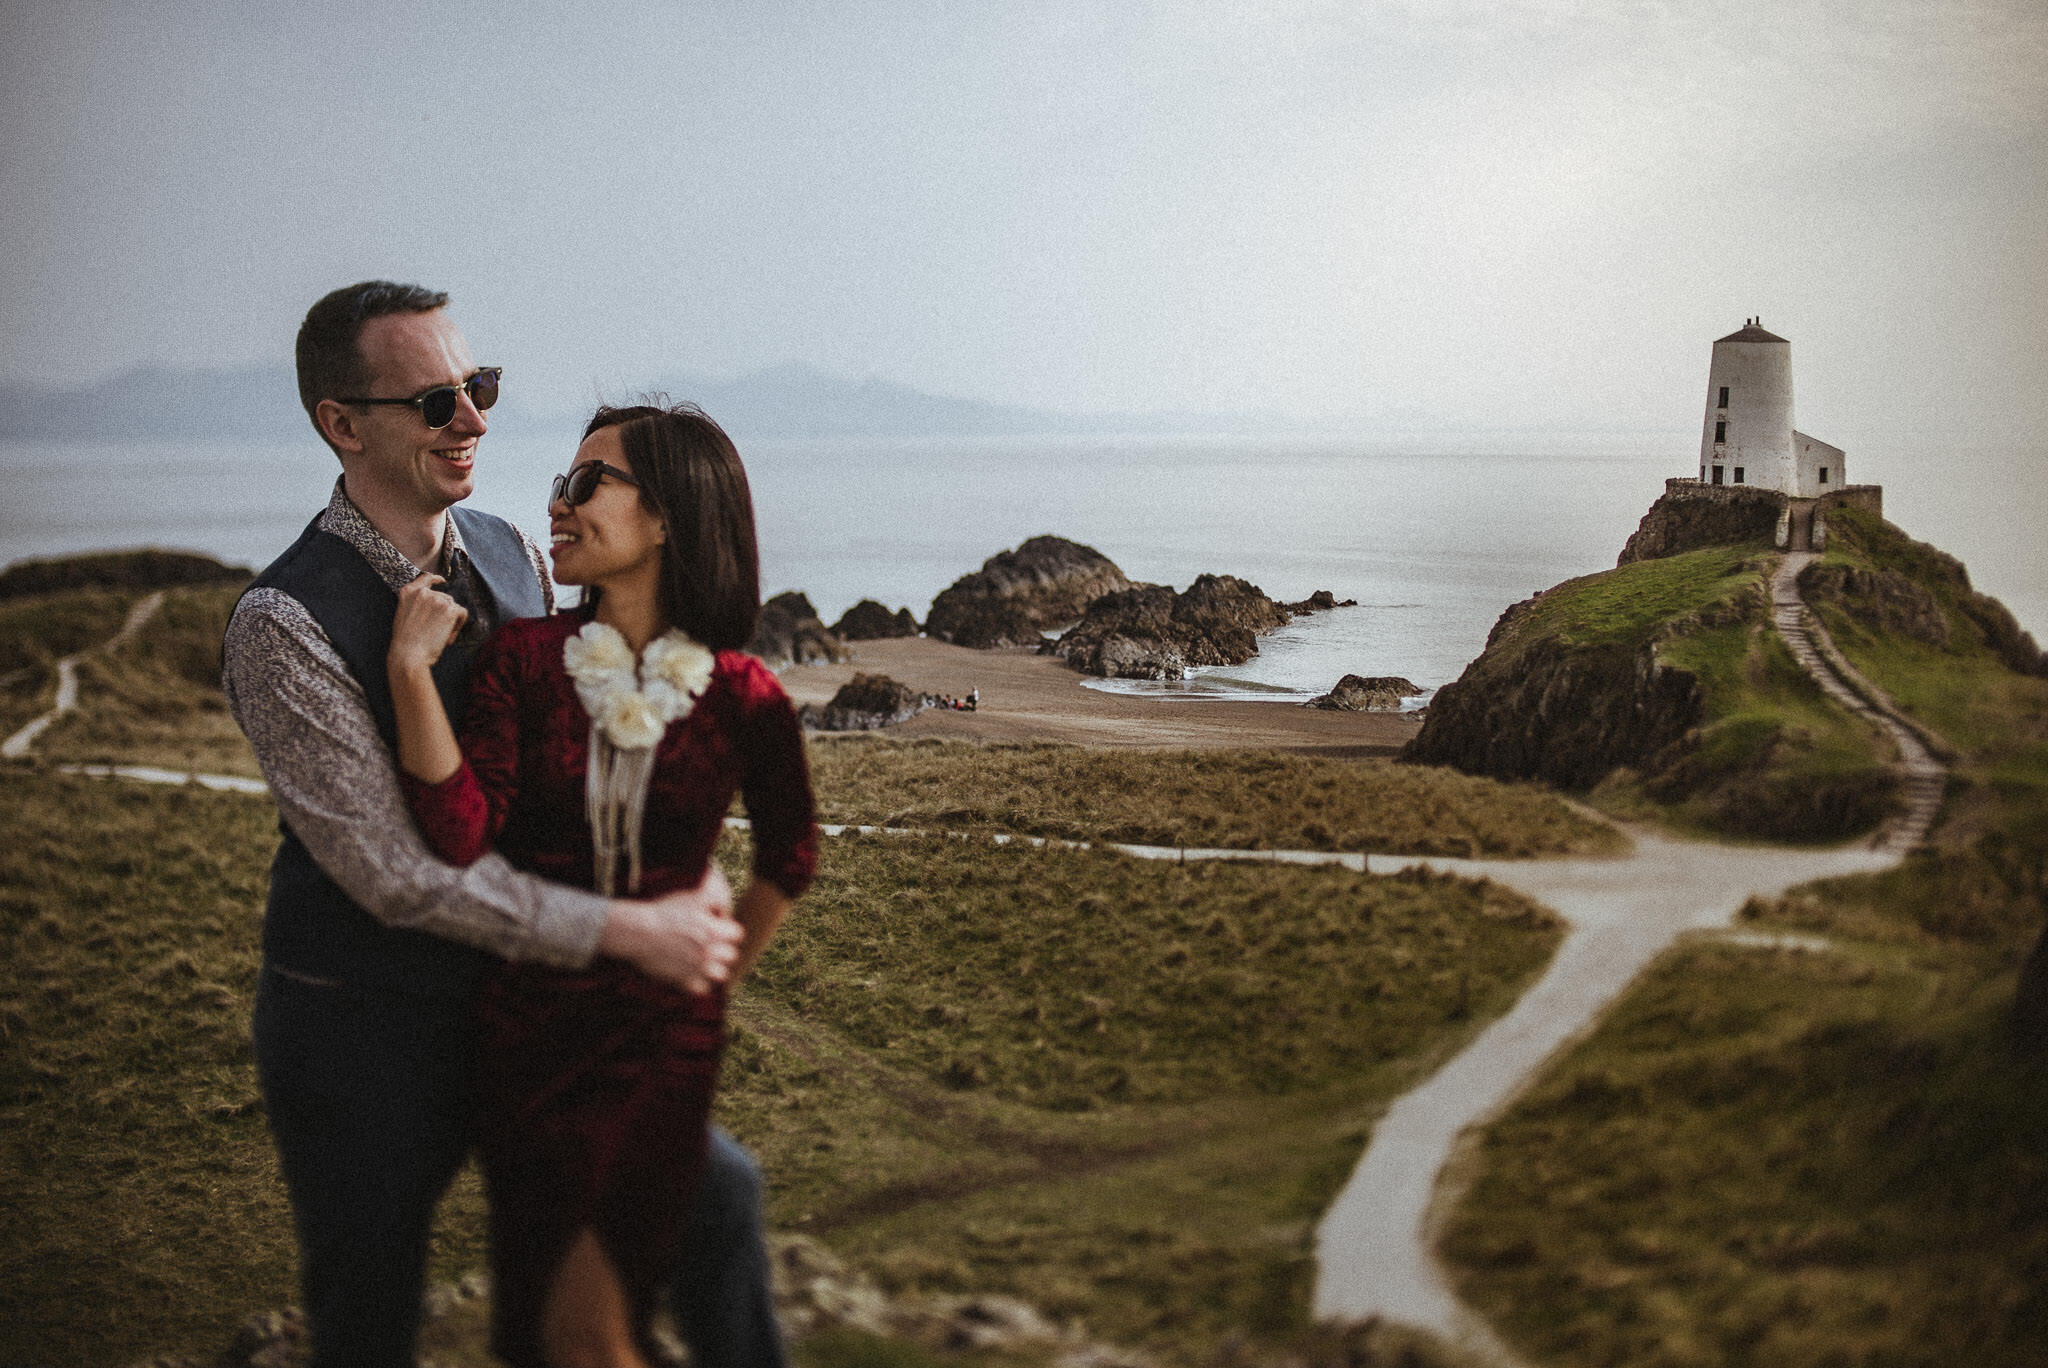 Wedding photography with Tŵr Mawr lighthouse, Anglesey.